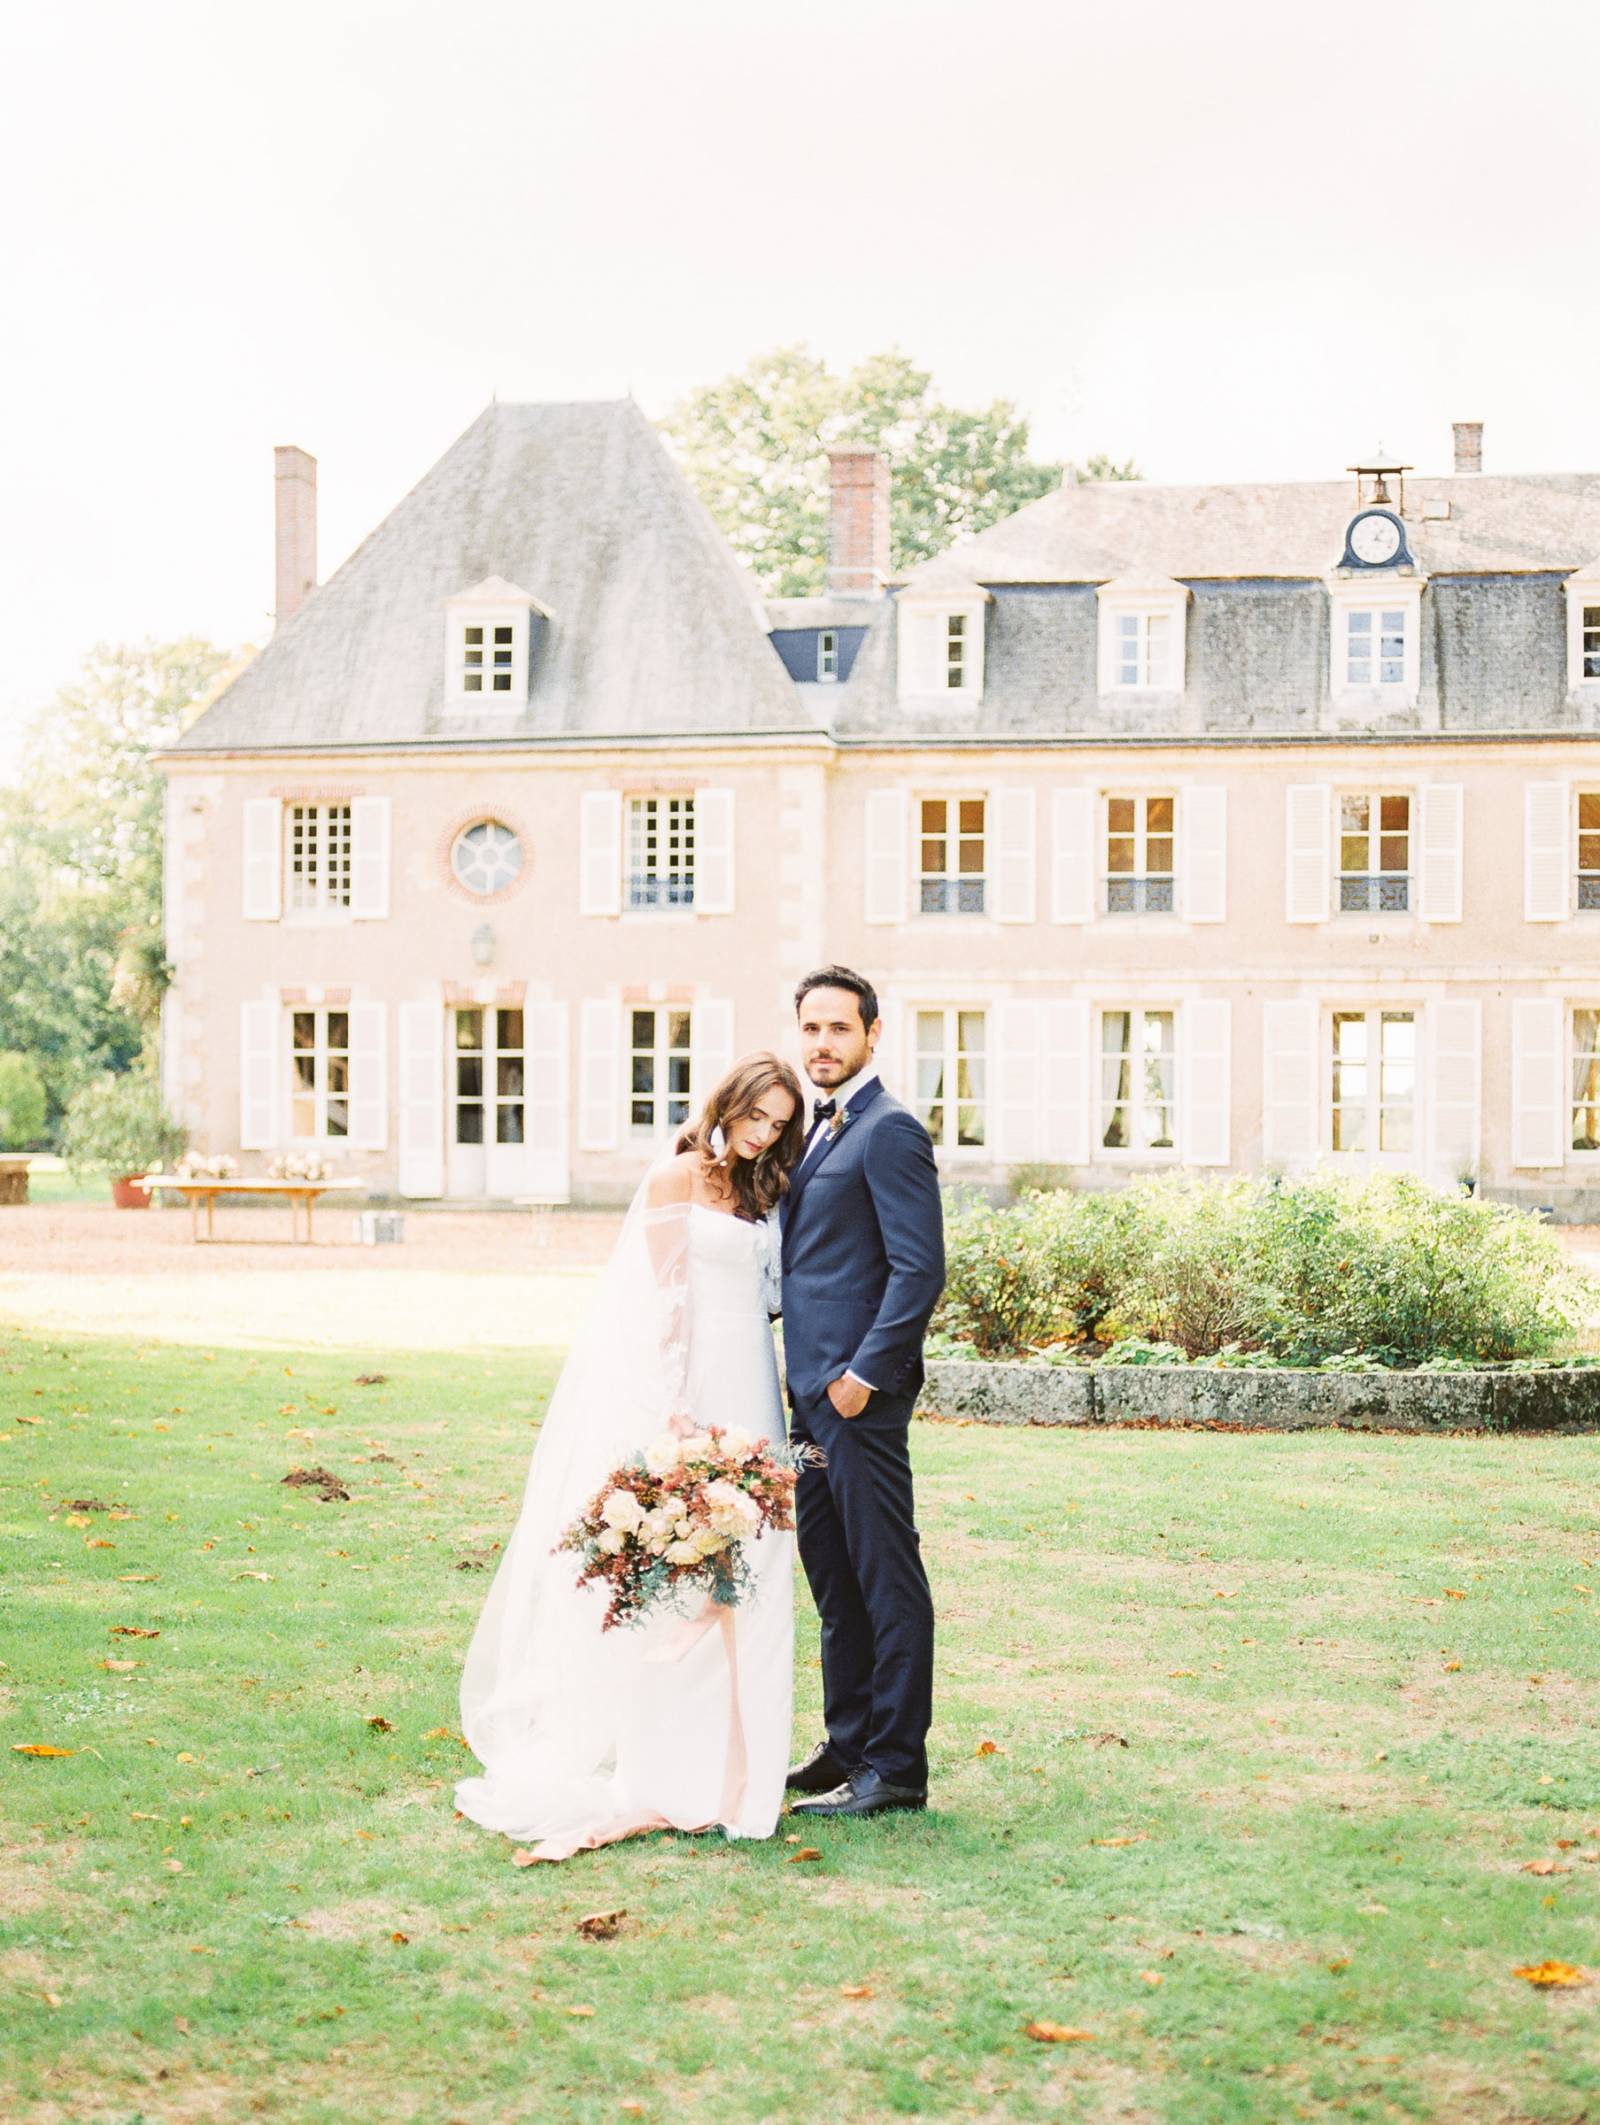 Romantic fall wedding inspiration at Chateau Bouthonvilliers | Paris ...